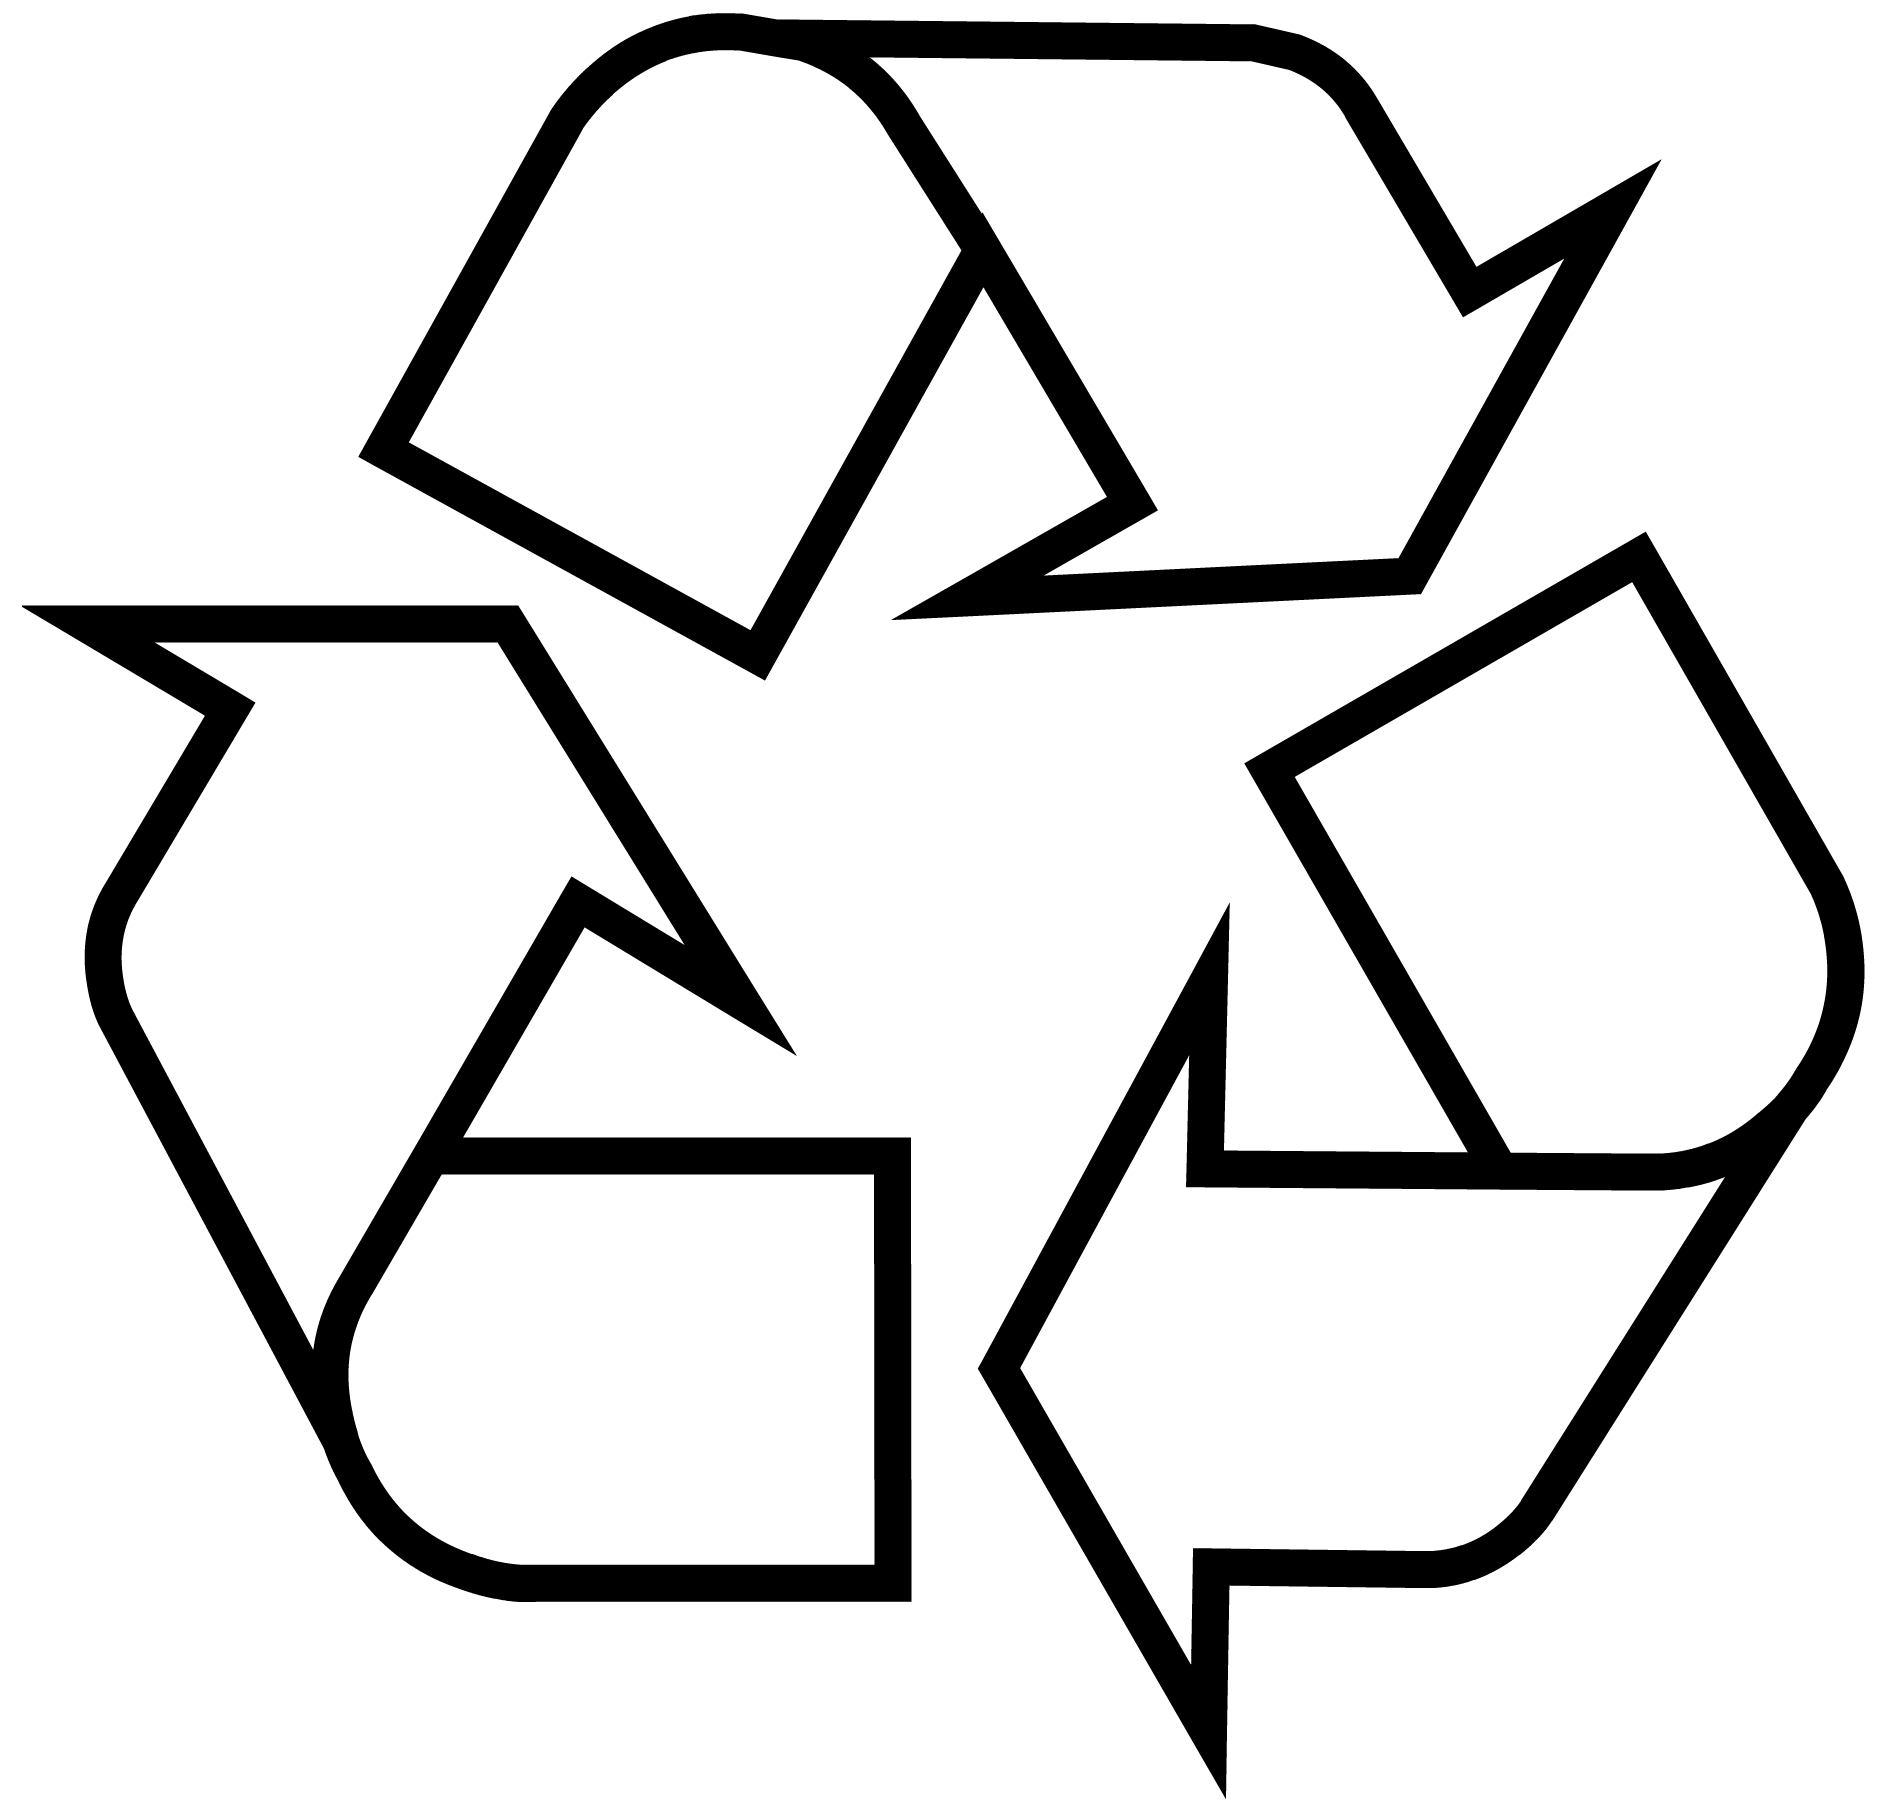 Recyle Logo - Recycle icon logo PNG images free download